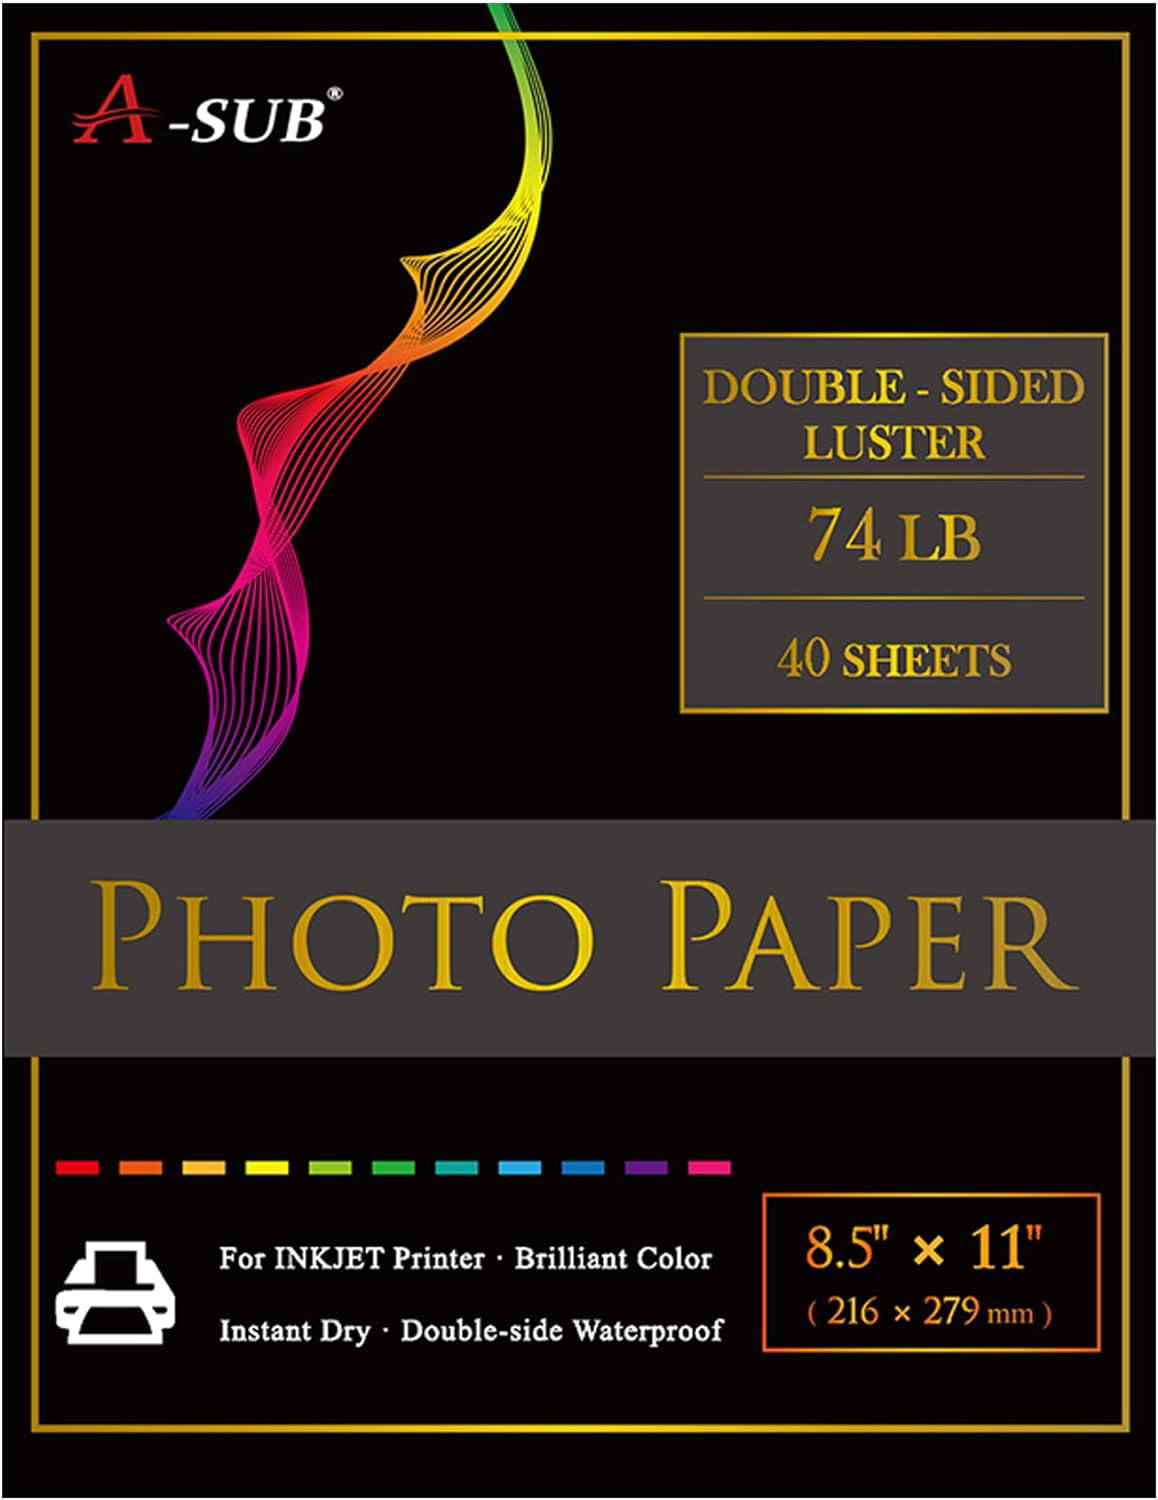 A-SUB Premium Double Sided Photo Paper Luster 8.5 x 11 Inch 74lb for Inkjet 40